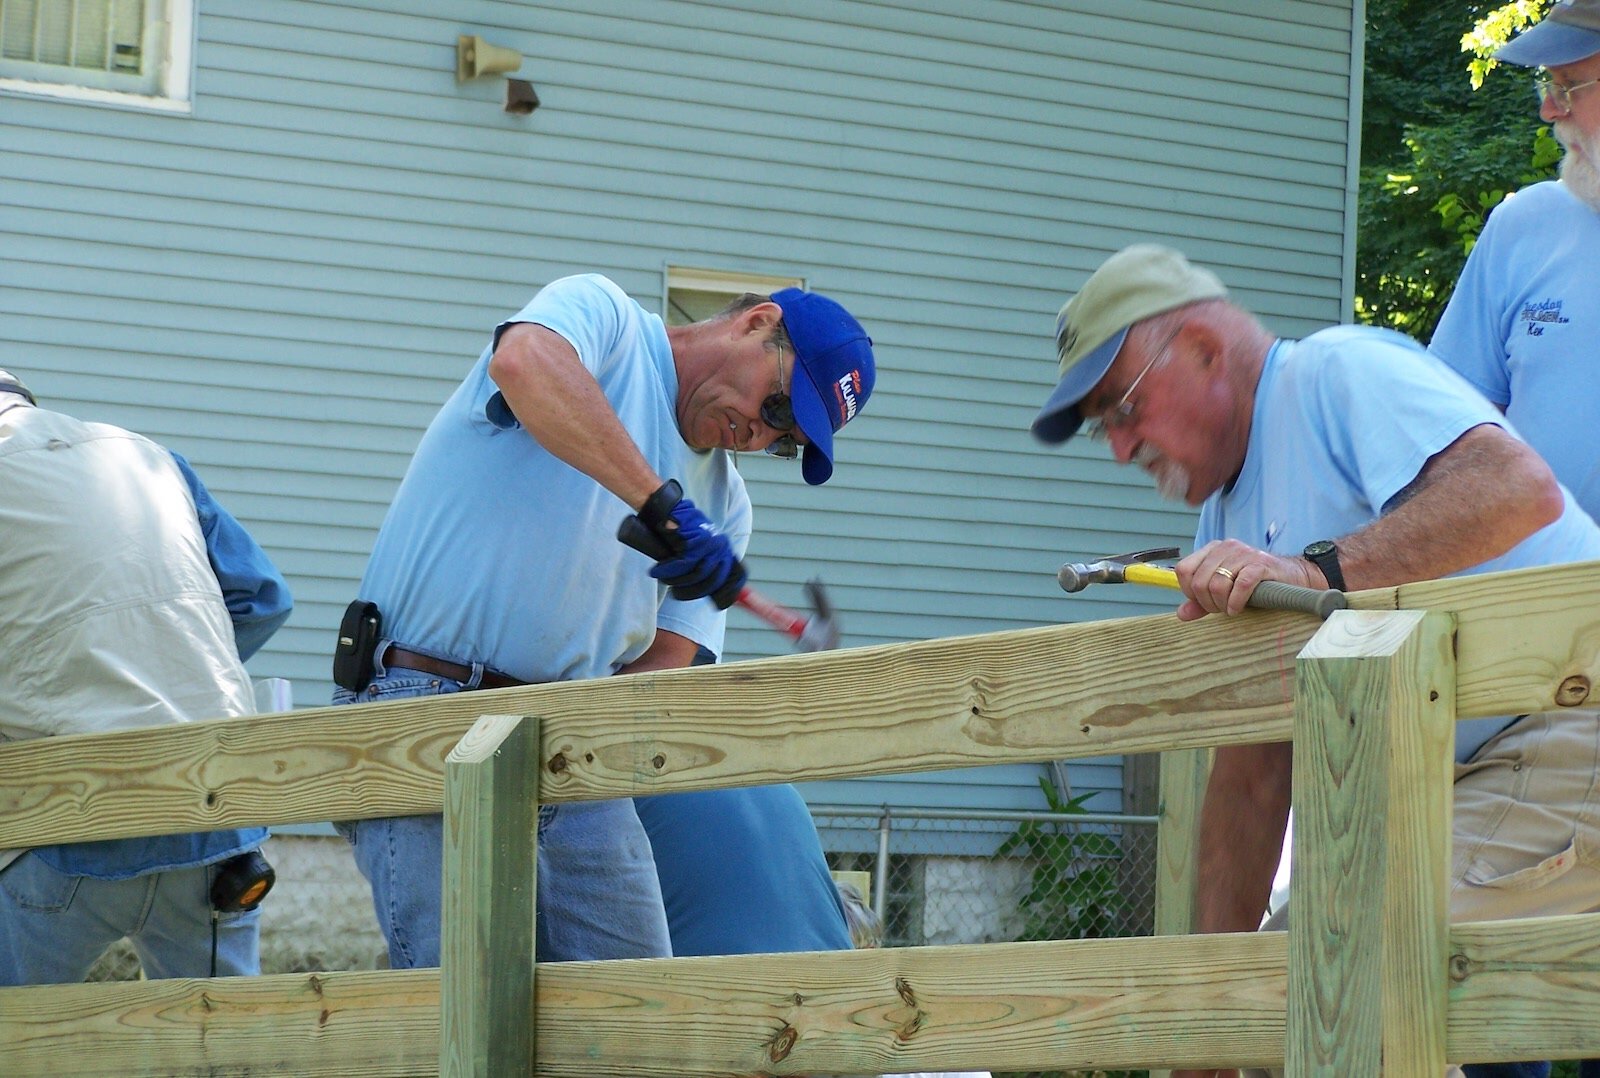 The Tuesday Toolmen are a volunteer group of generally retired and skilled individuals who do free home repair and home modification work to help low-income seniors contacted through Senior Services. 